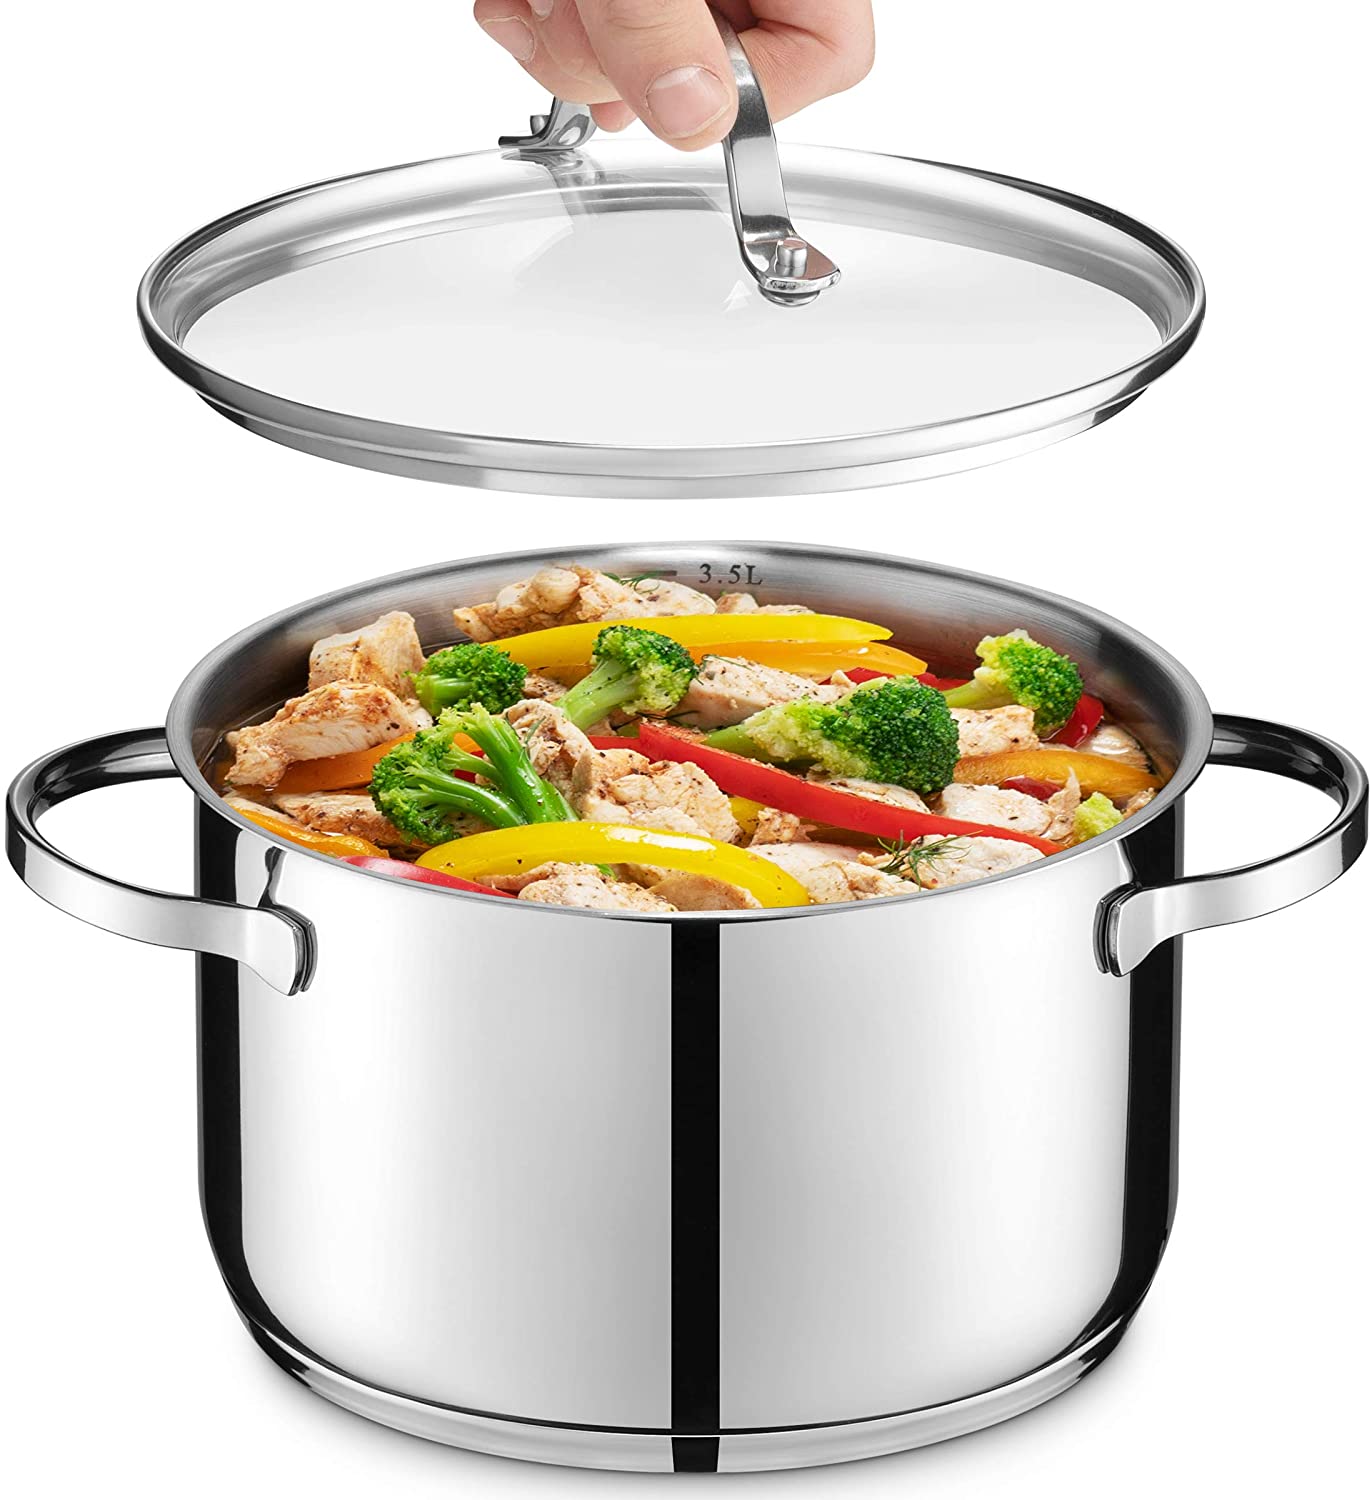 GOURMEX 6L Induction Stockpot Stainless Steel Pot with Glass Cookware Lid